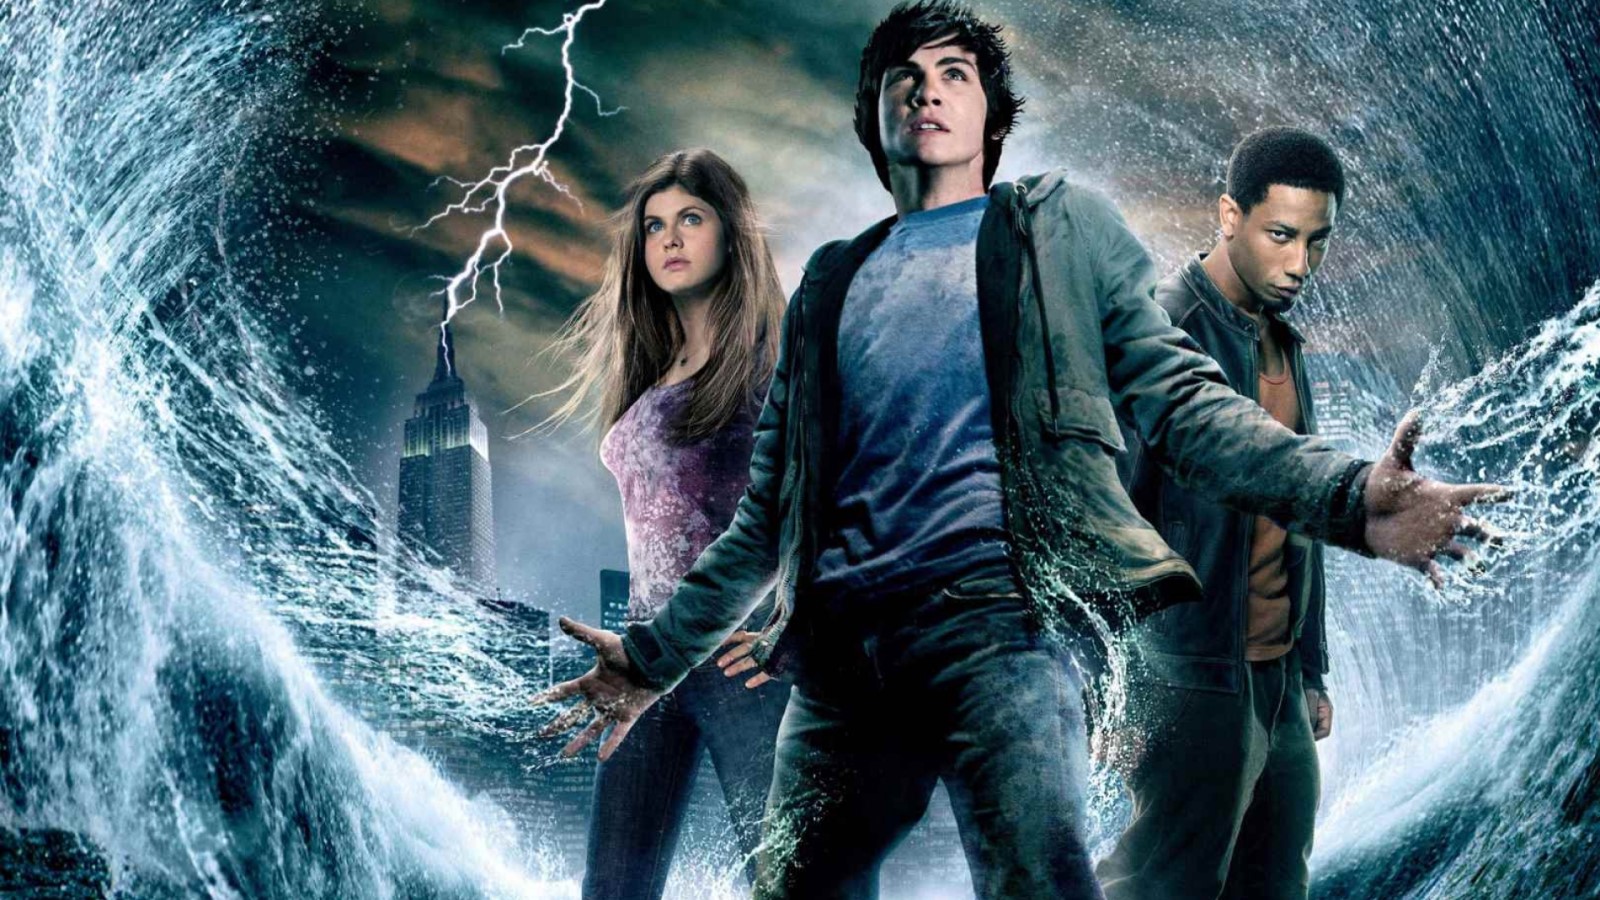 How to Watch Percy Jackson Movies in Order?